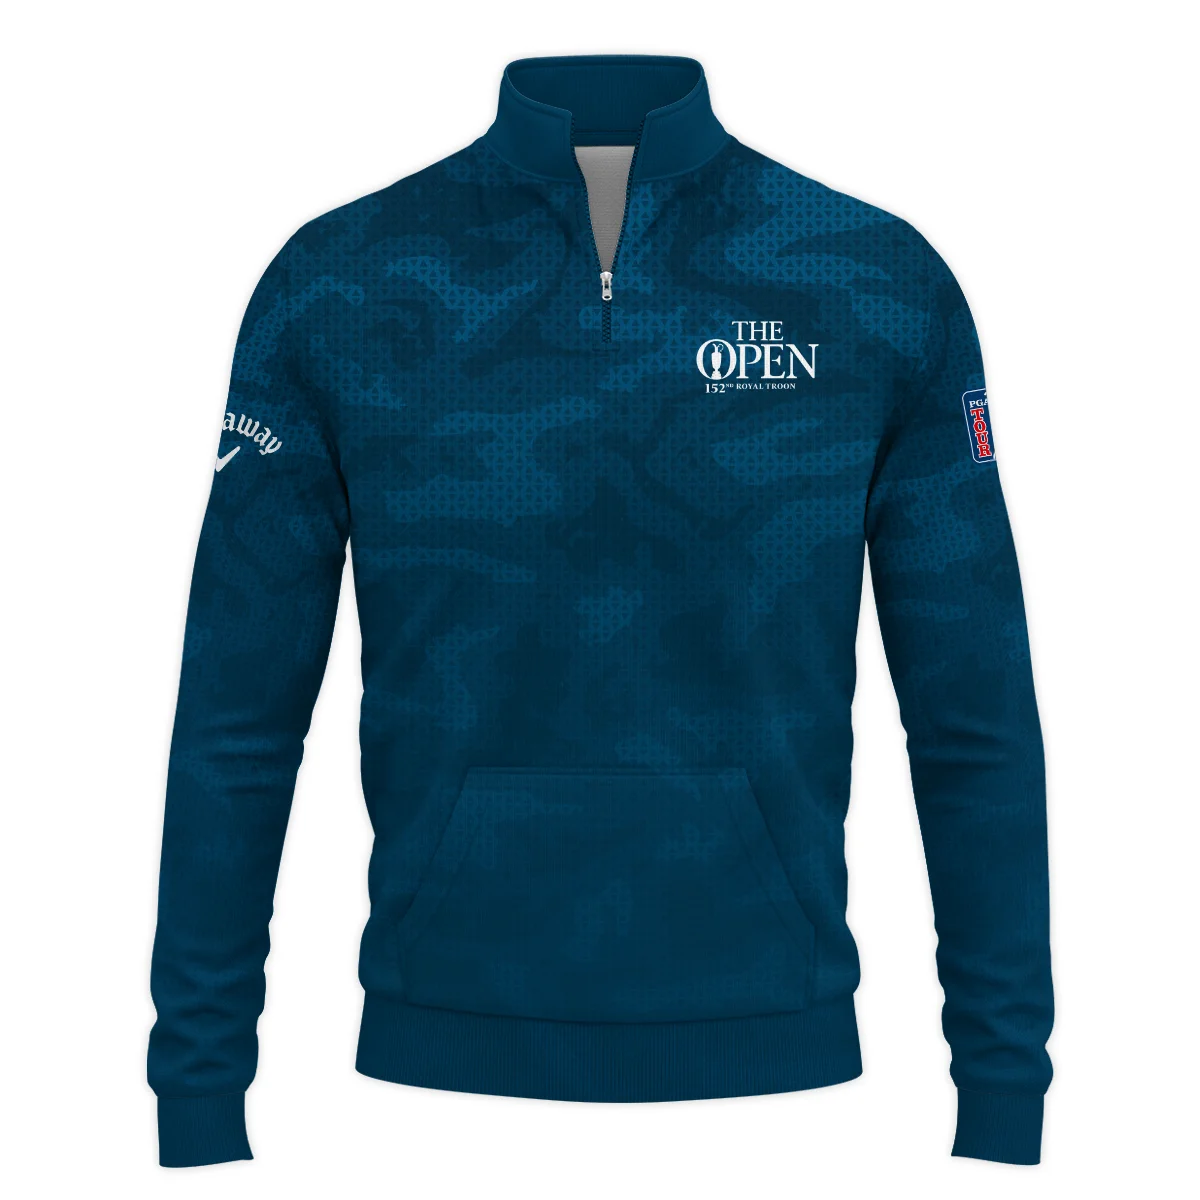 Callaway 152nd Open Championship Dark Blue Abstract Background Quarter-Zip Jacket All Over Prints HOTOP260624A02CLWSWZ